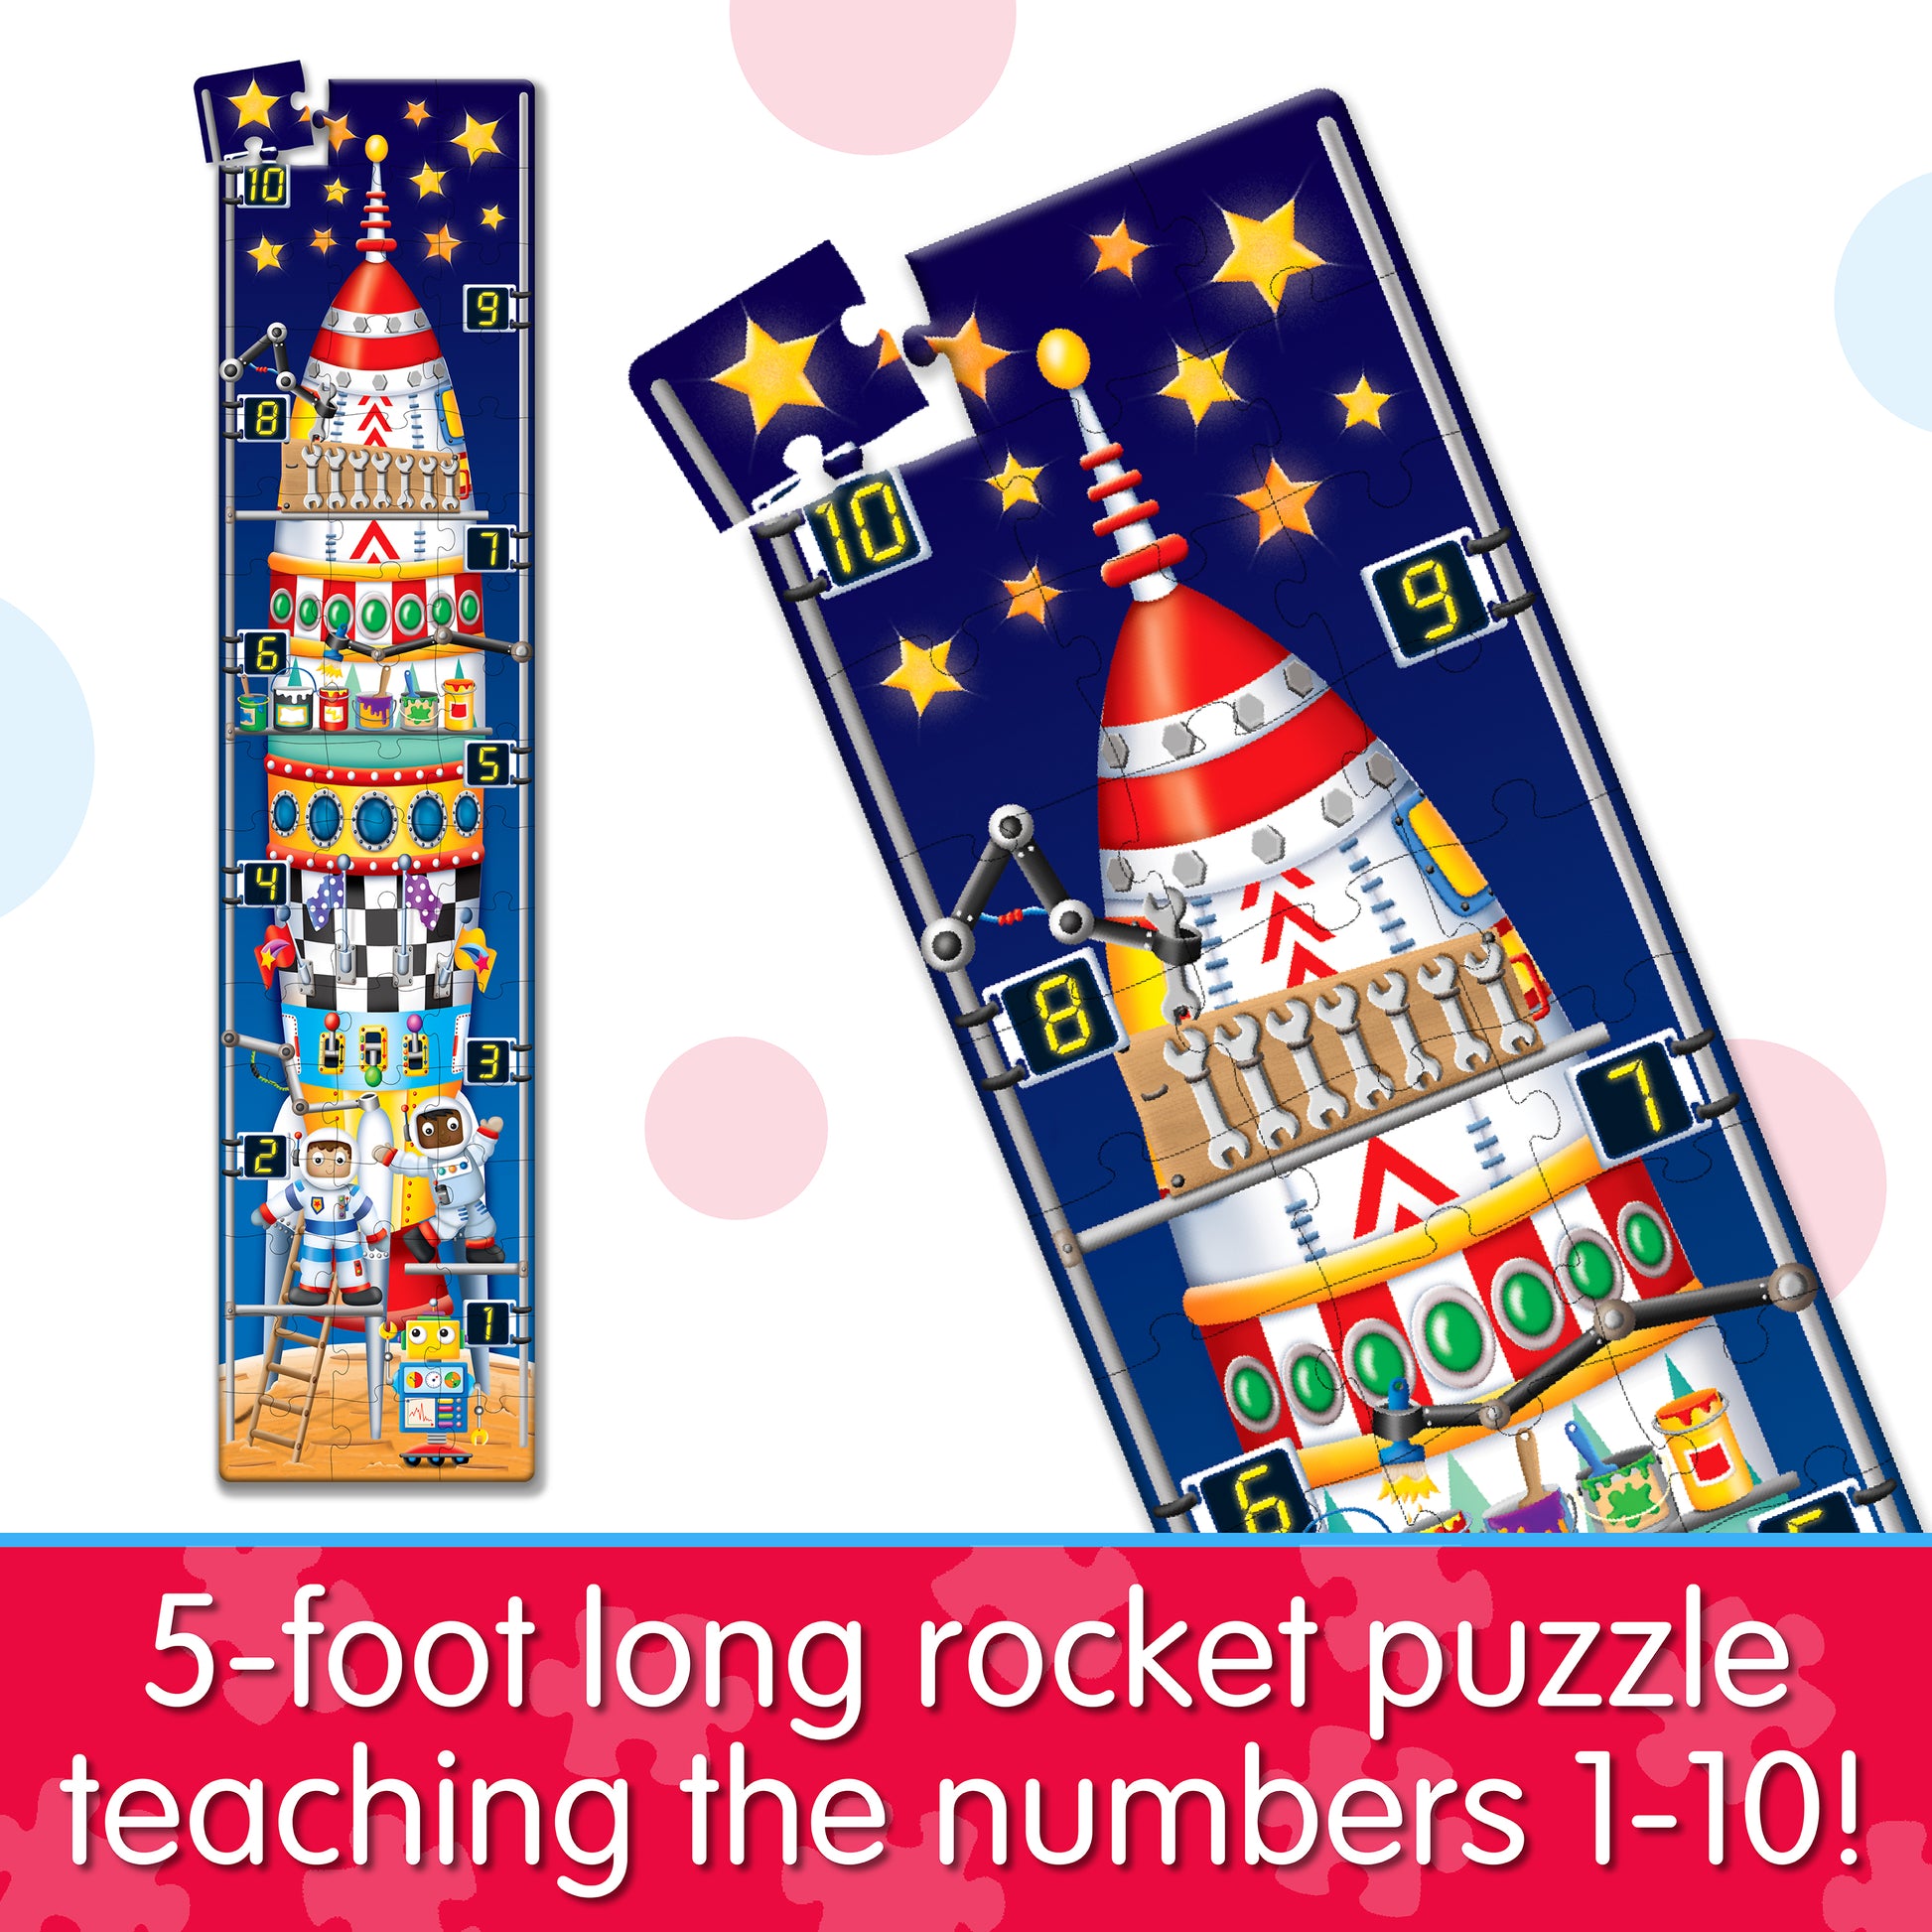 Infographic about Long and Tall 123 Rocketship Puzzle that says, "5-foot long rocket puzzle teaching the numbers 1-10!"